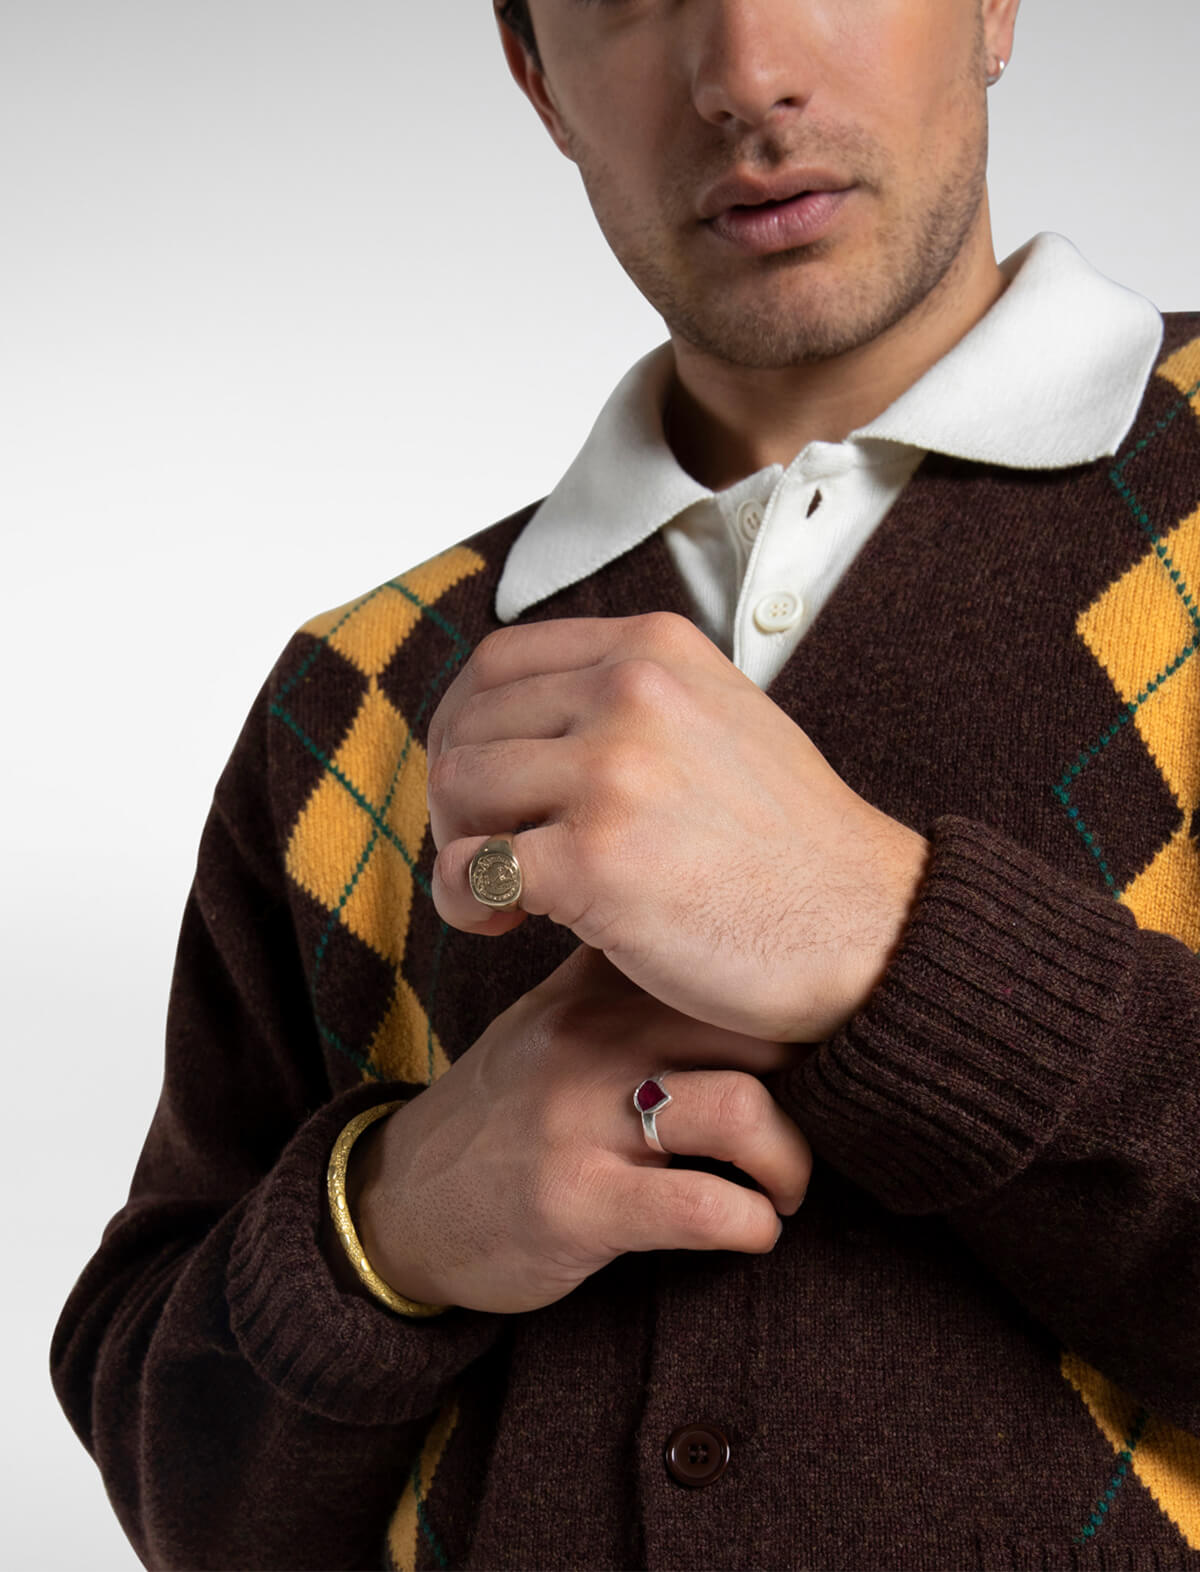 MANORS GOLF Striped Argyle Cardigan in Brown/Gold